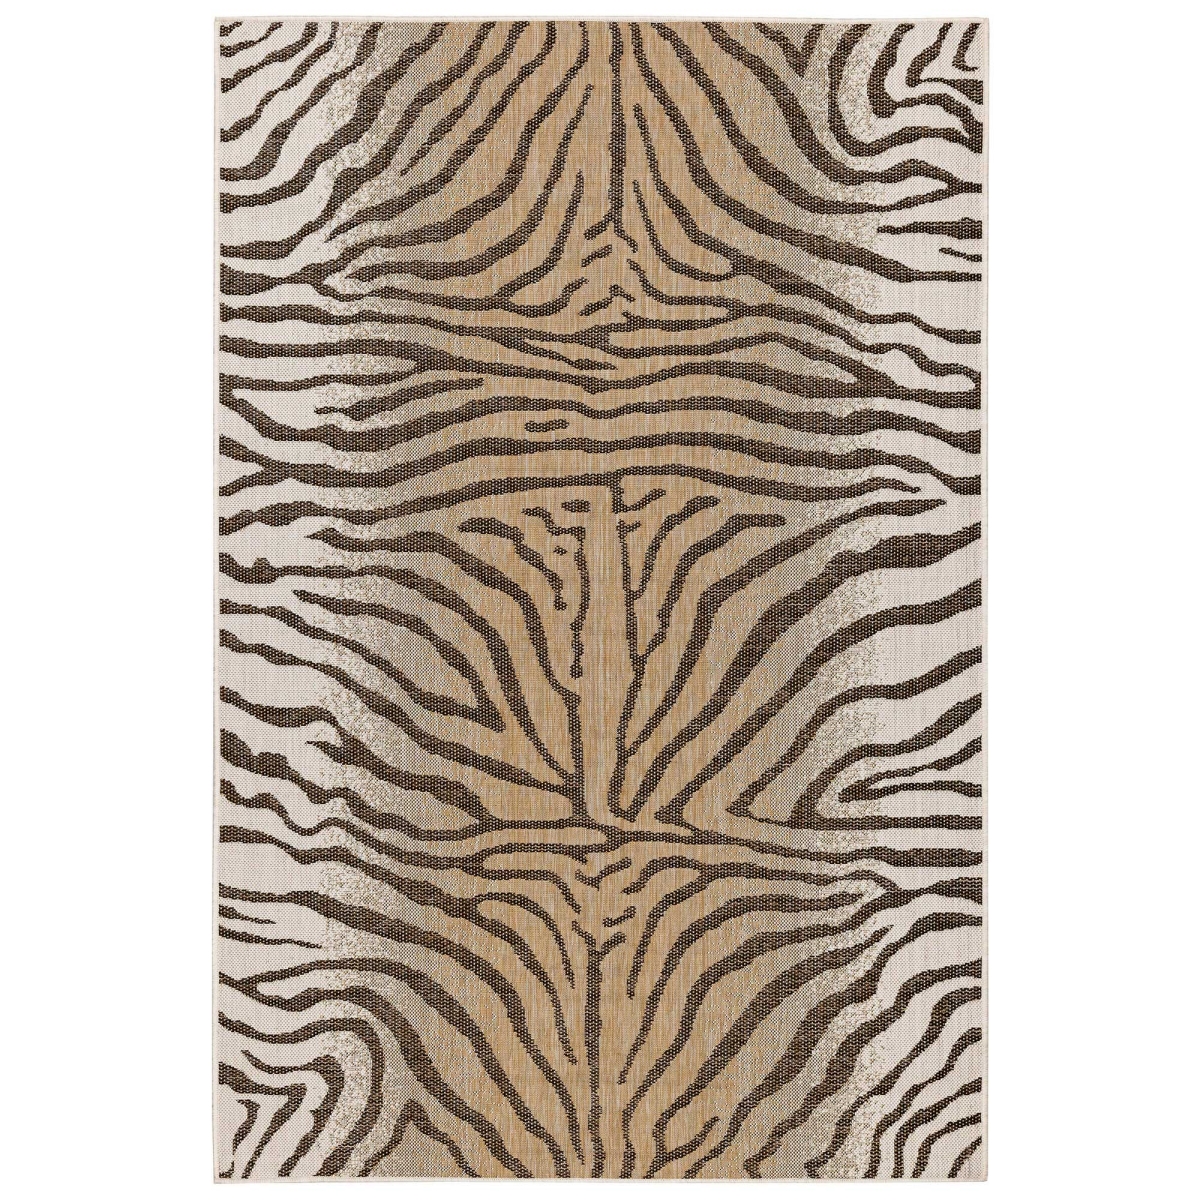 Trans-ocean Imports Cre45843112 39 In. X 59 In. Liora Manne Carmel Zebra Indoor & Outdoor Wilton Woven Rectangle Rug - Sand